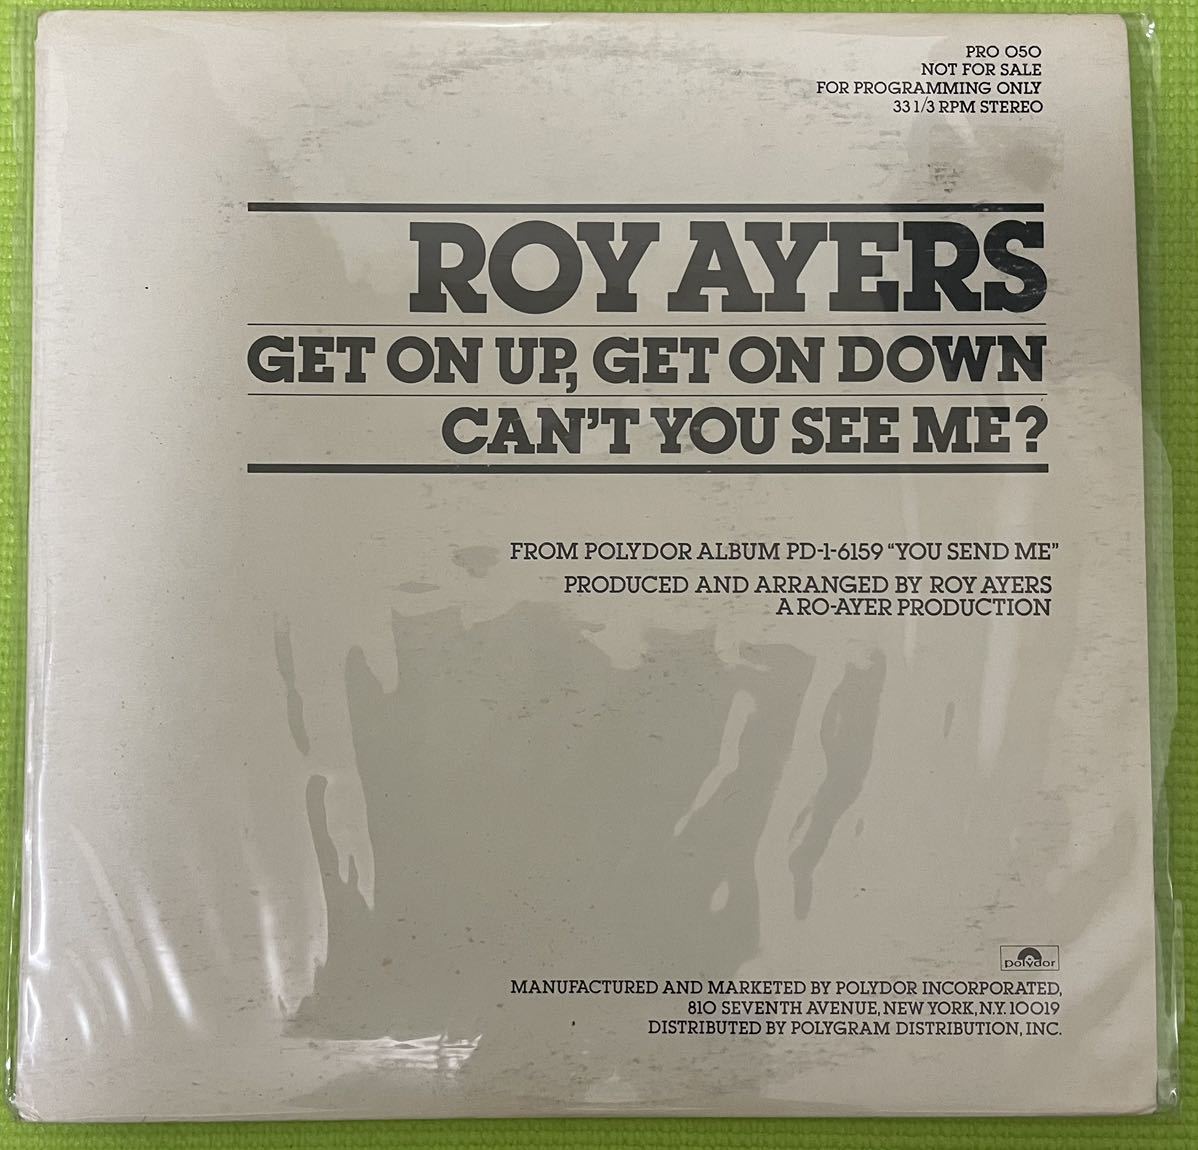 HIPHOP soul disco record ソウル ディスコレコード Roy Ayers Get On Up, Get On Down(12) promoの画像1